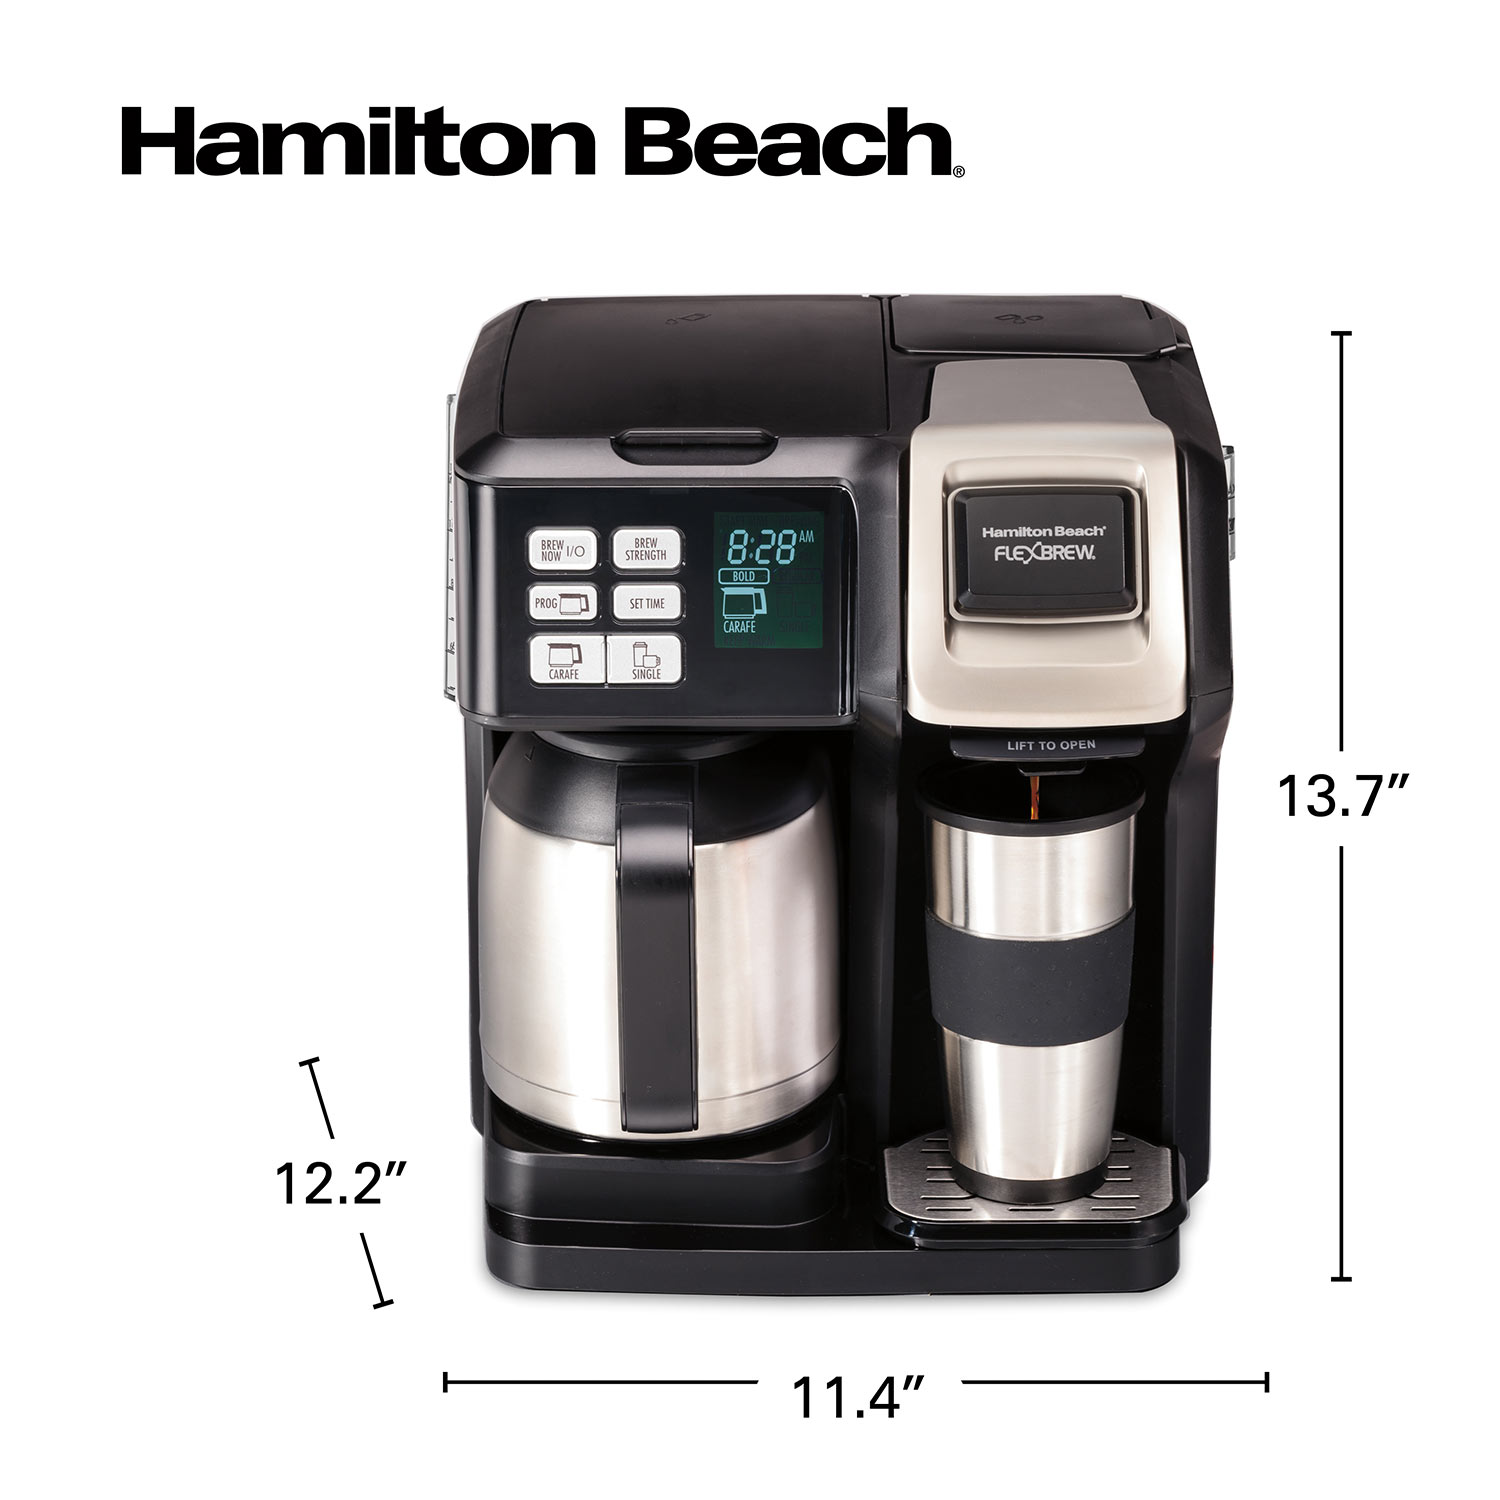 Hamilton Beach FlexBrew Trio 2-Way Coffee Maker, Compatible with K-Cup Pods  or Grounds, Combo, Single Serve & Full 10c Thermal Pot, Black and